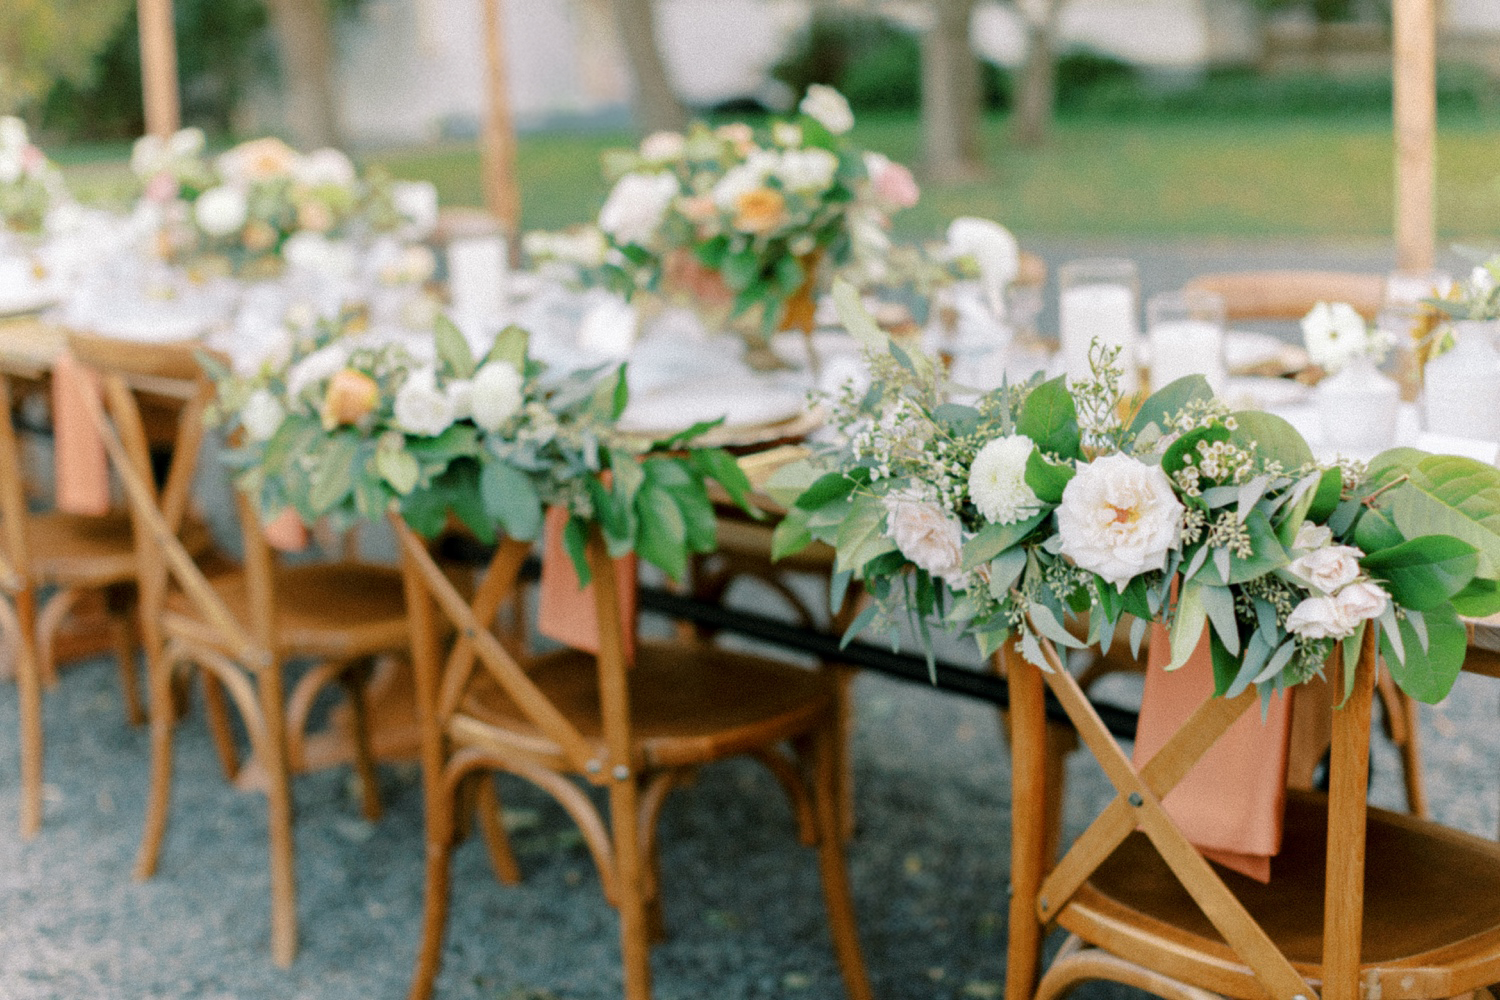 Wedding reception decor by Kasey D Weddings for intimate Abeja Winery Wedding